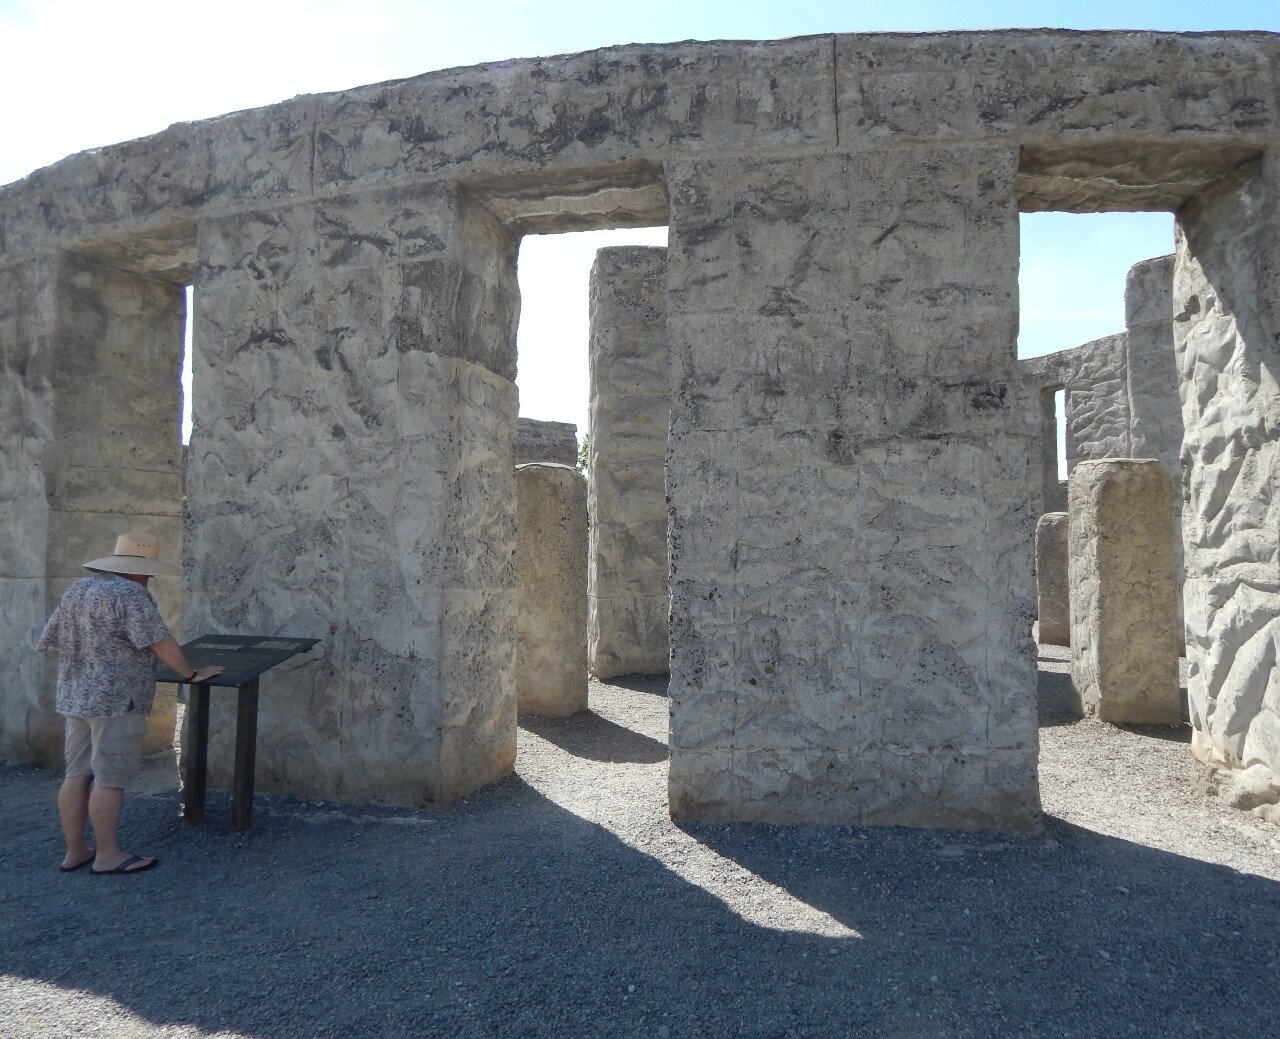  Maryhill Stonehenge WWI Memorial, north of the Columbia River (author’s brother and self en route to Eastern OR to witness the 2017 Total Eclipse of the Sun, by Dee Caputo 